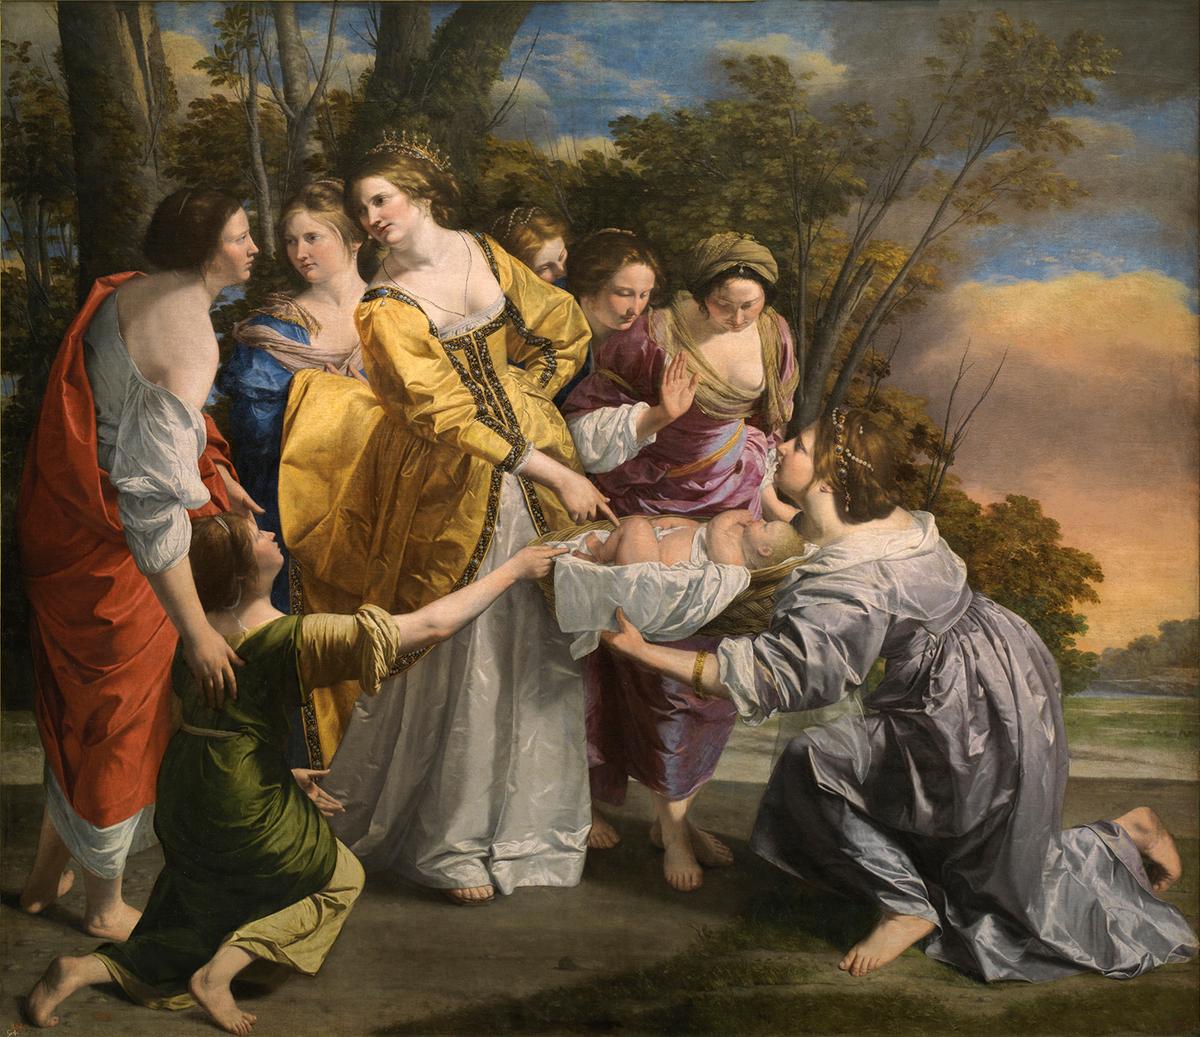 "The Finding of Moses," 1633, by Orazio Gentileschi. Oil on canvas; 95.2 inches by 110.6 inches. Prado Museum, Madrid. (Public Domain)